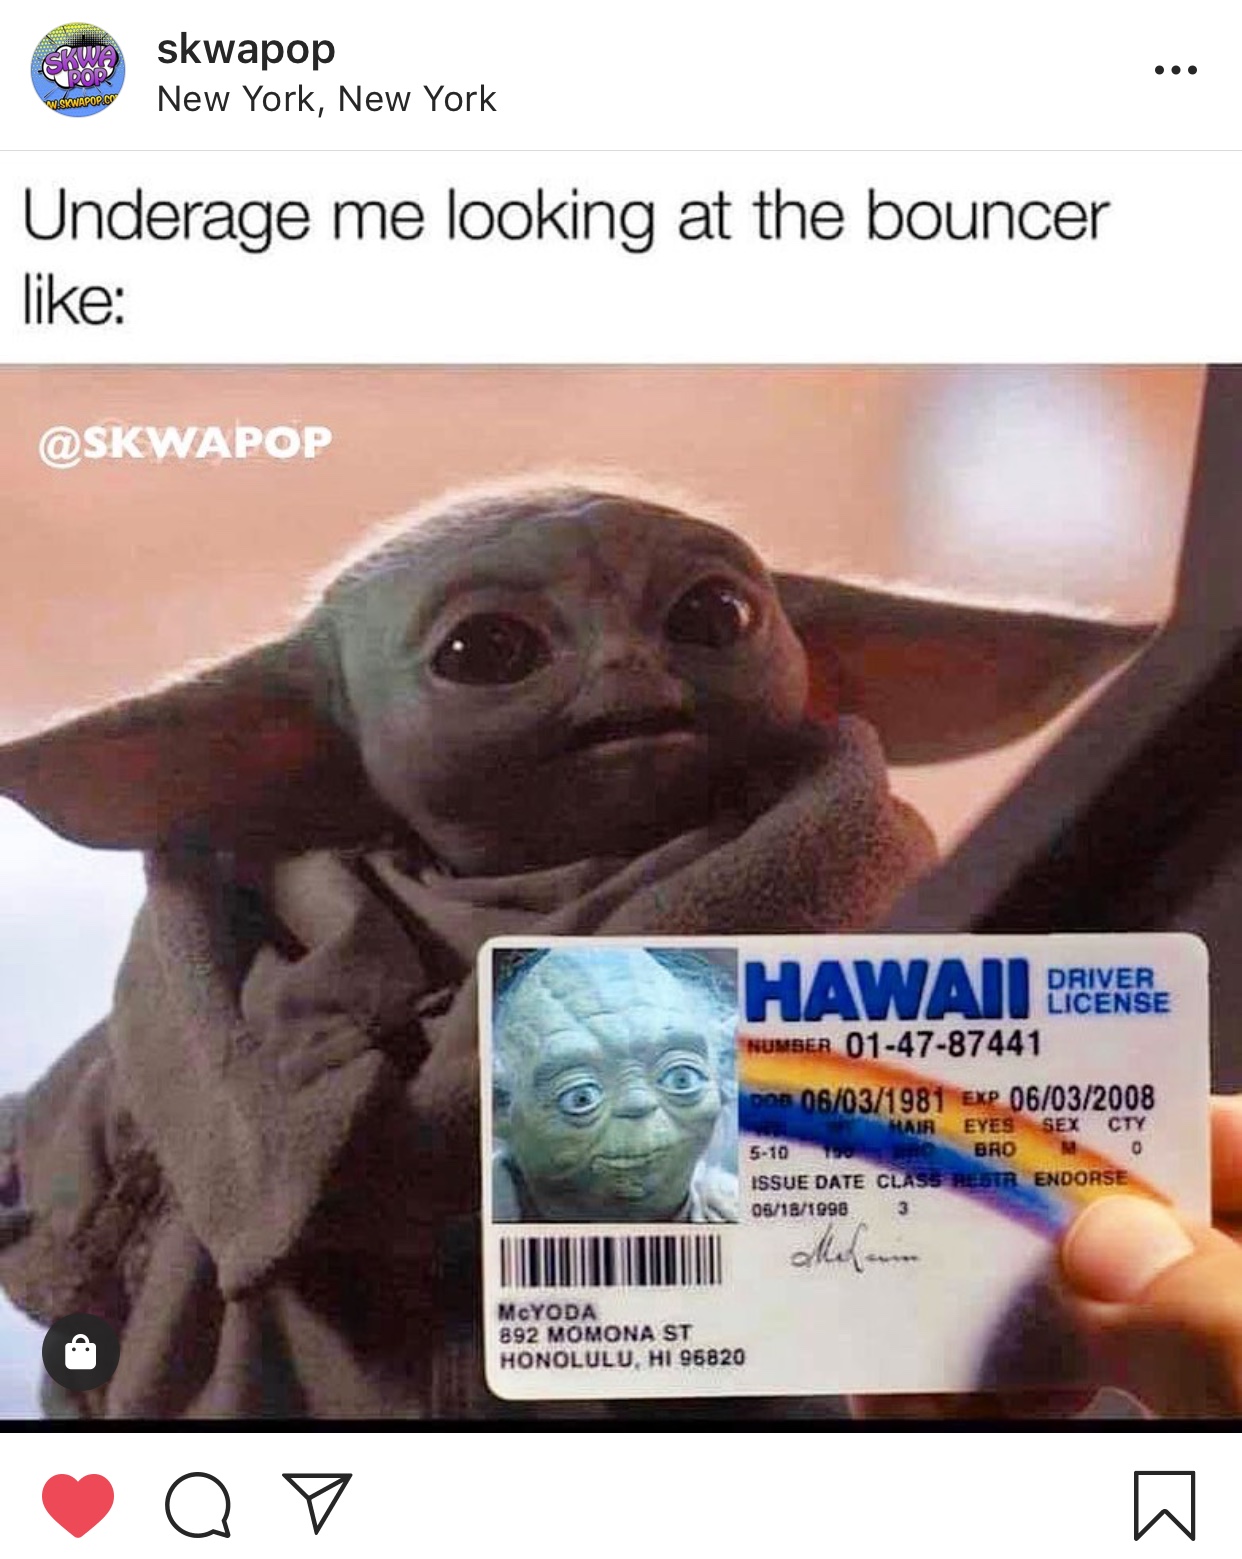 baby yoda meme - skwapop New York, New York W.Skwapopco Underage me looking at the bouncer Hawaii Driverse Driver License Number 014787441 On 06031981 Exp 06032008 Mair Eyes Sex Cty 510 Bro 20 Issue Date Class Pestr Endorse 05181998 st 3 McYODA 892 Momona